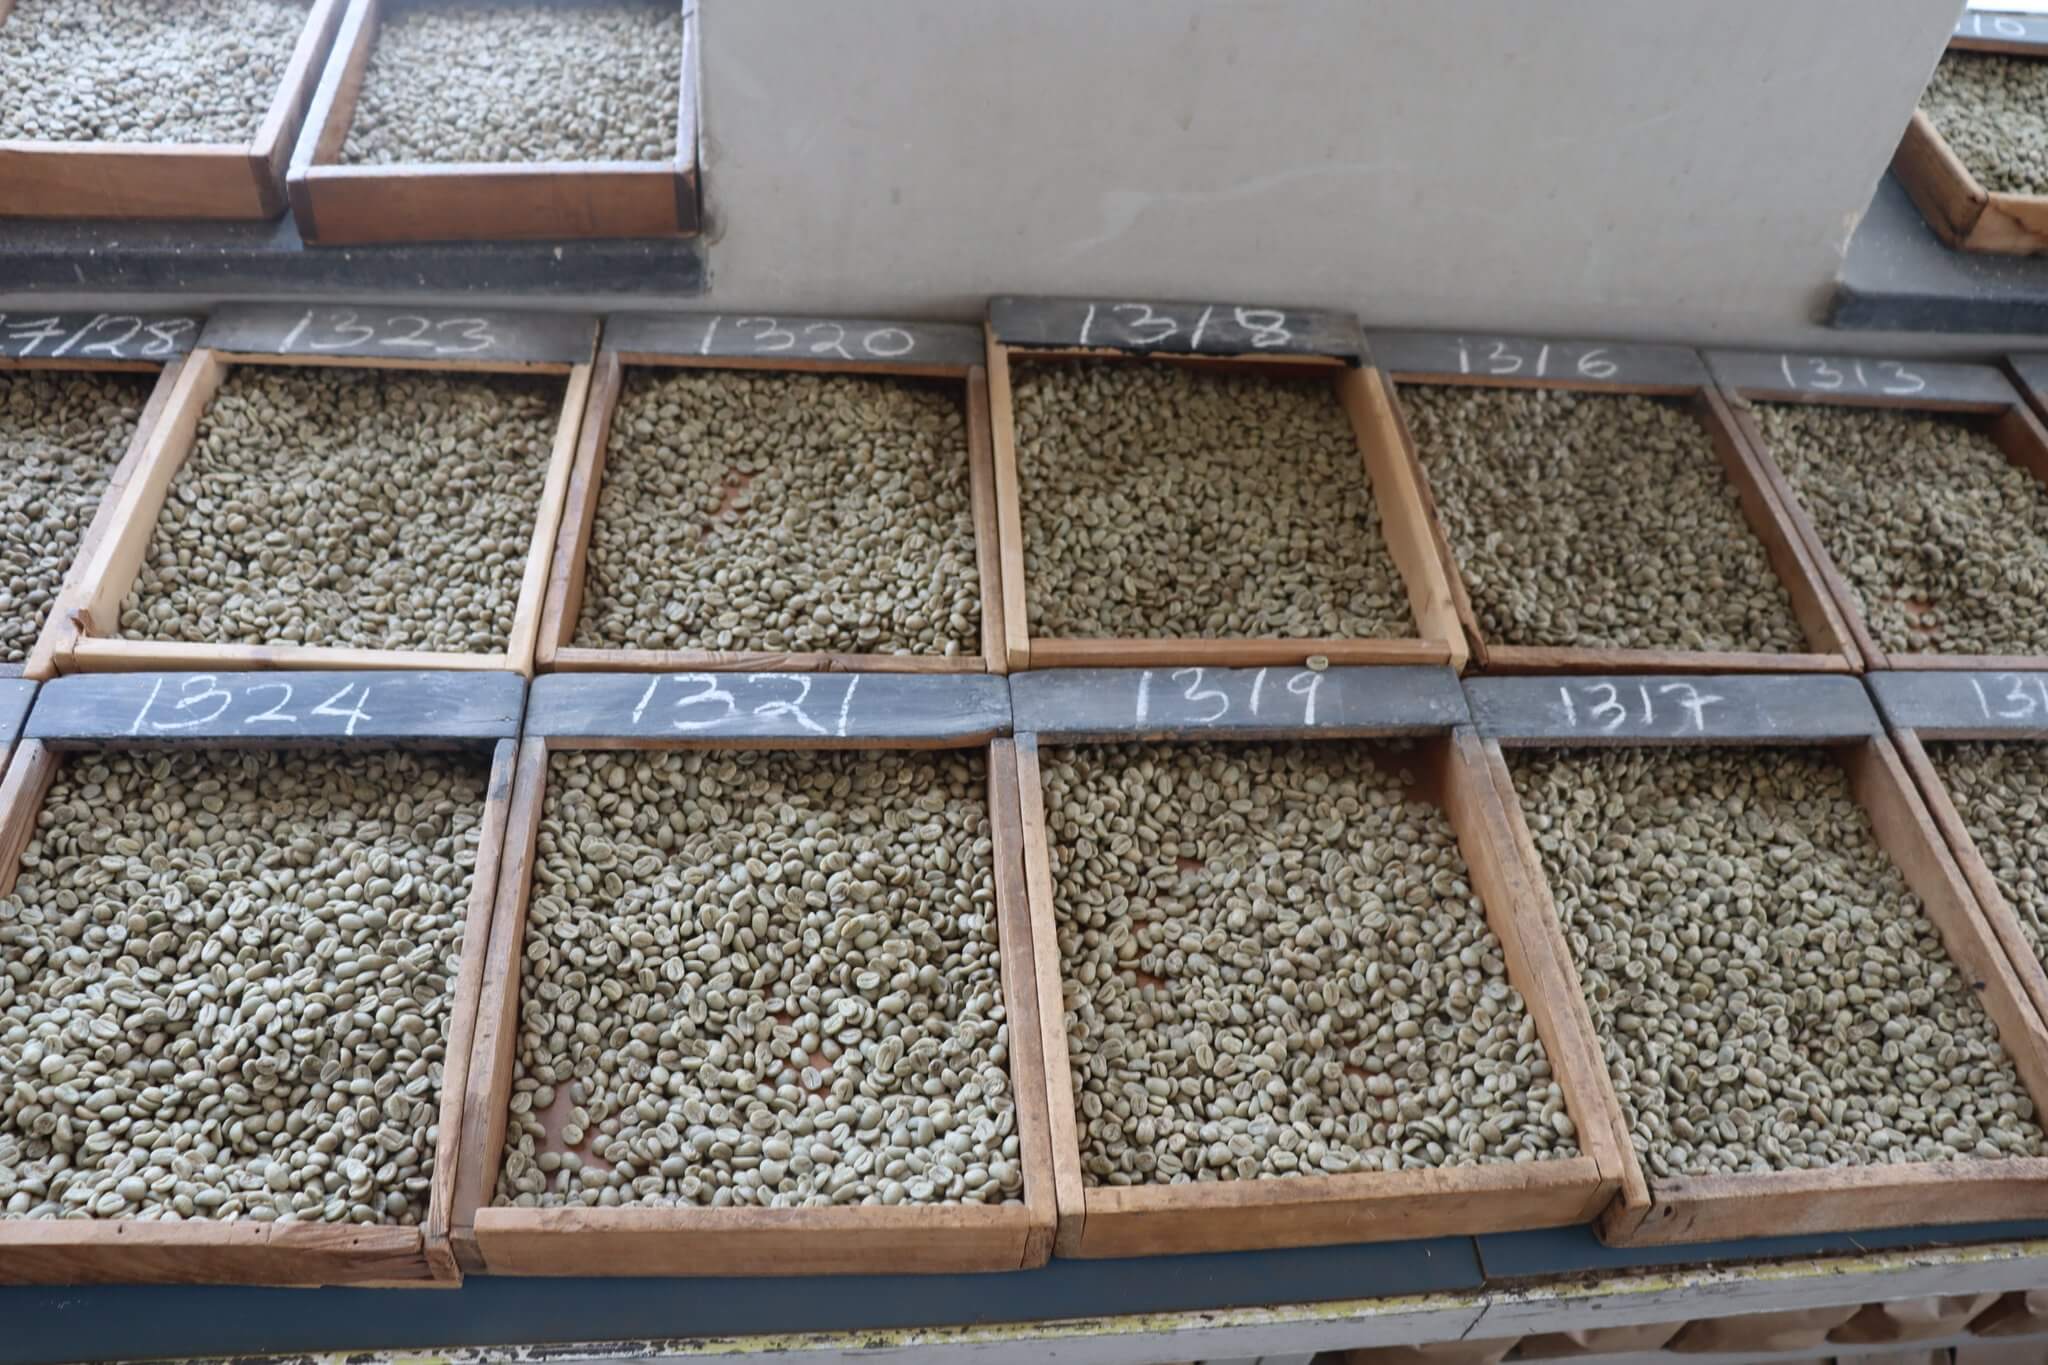 Ethiopia’s Coffee Exports Deterred by Logistical Woes and Diplomatic Tensions